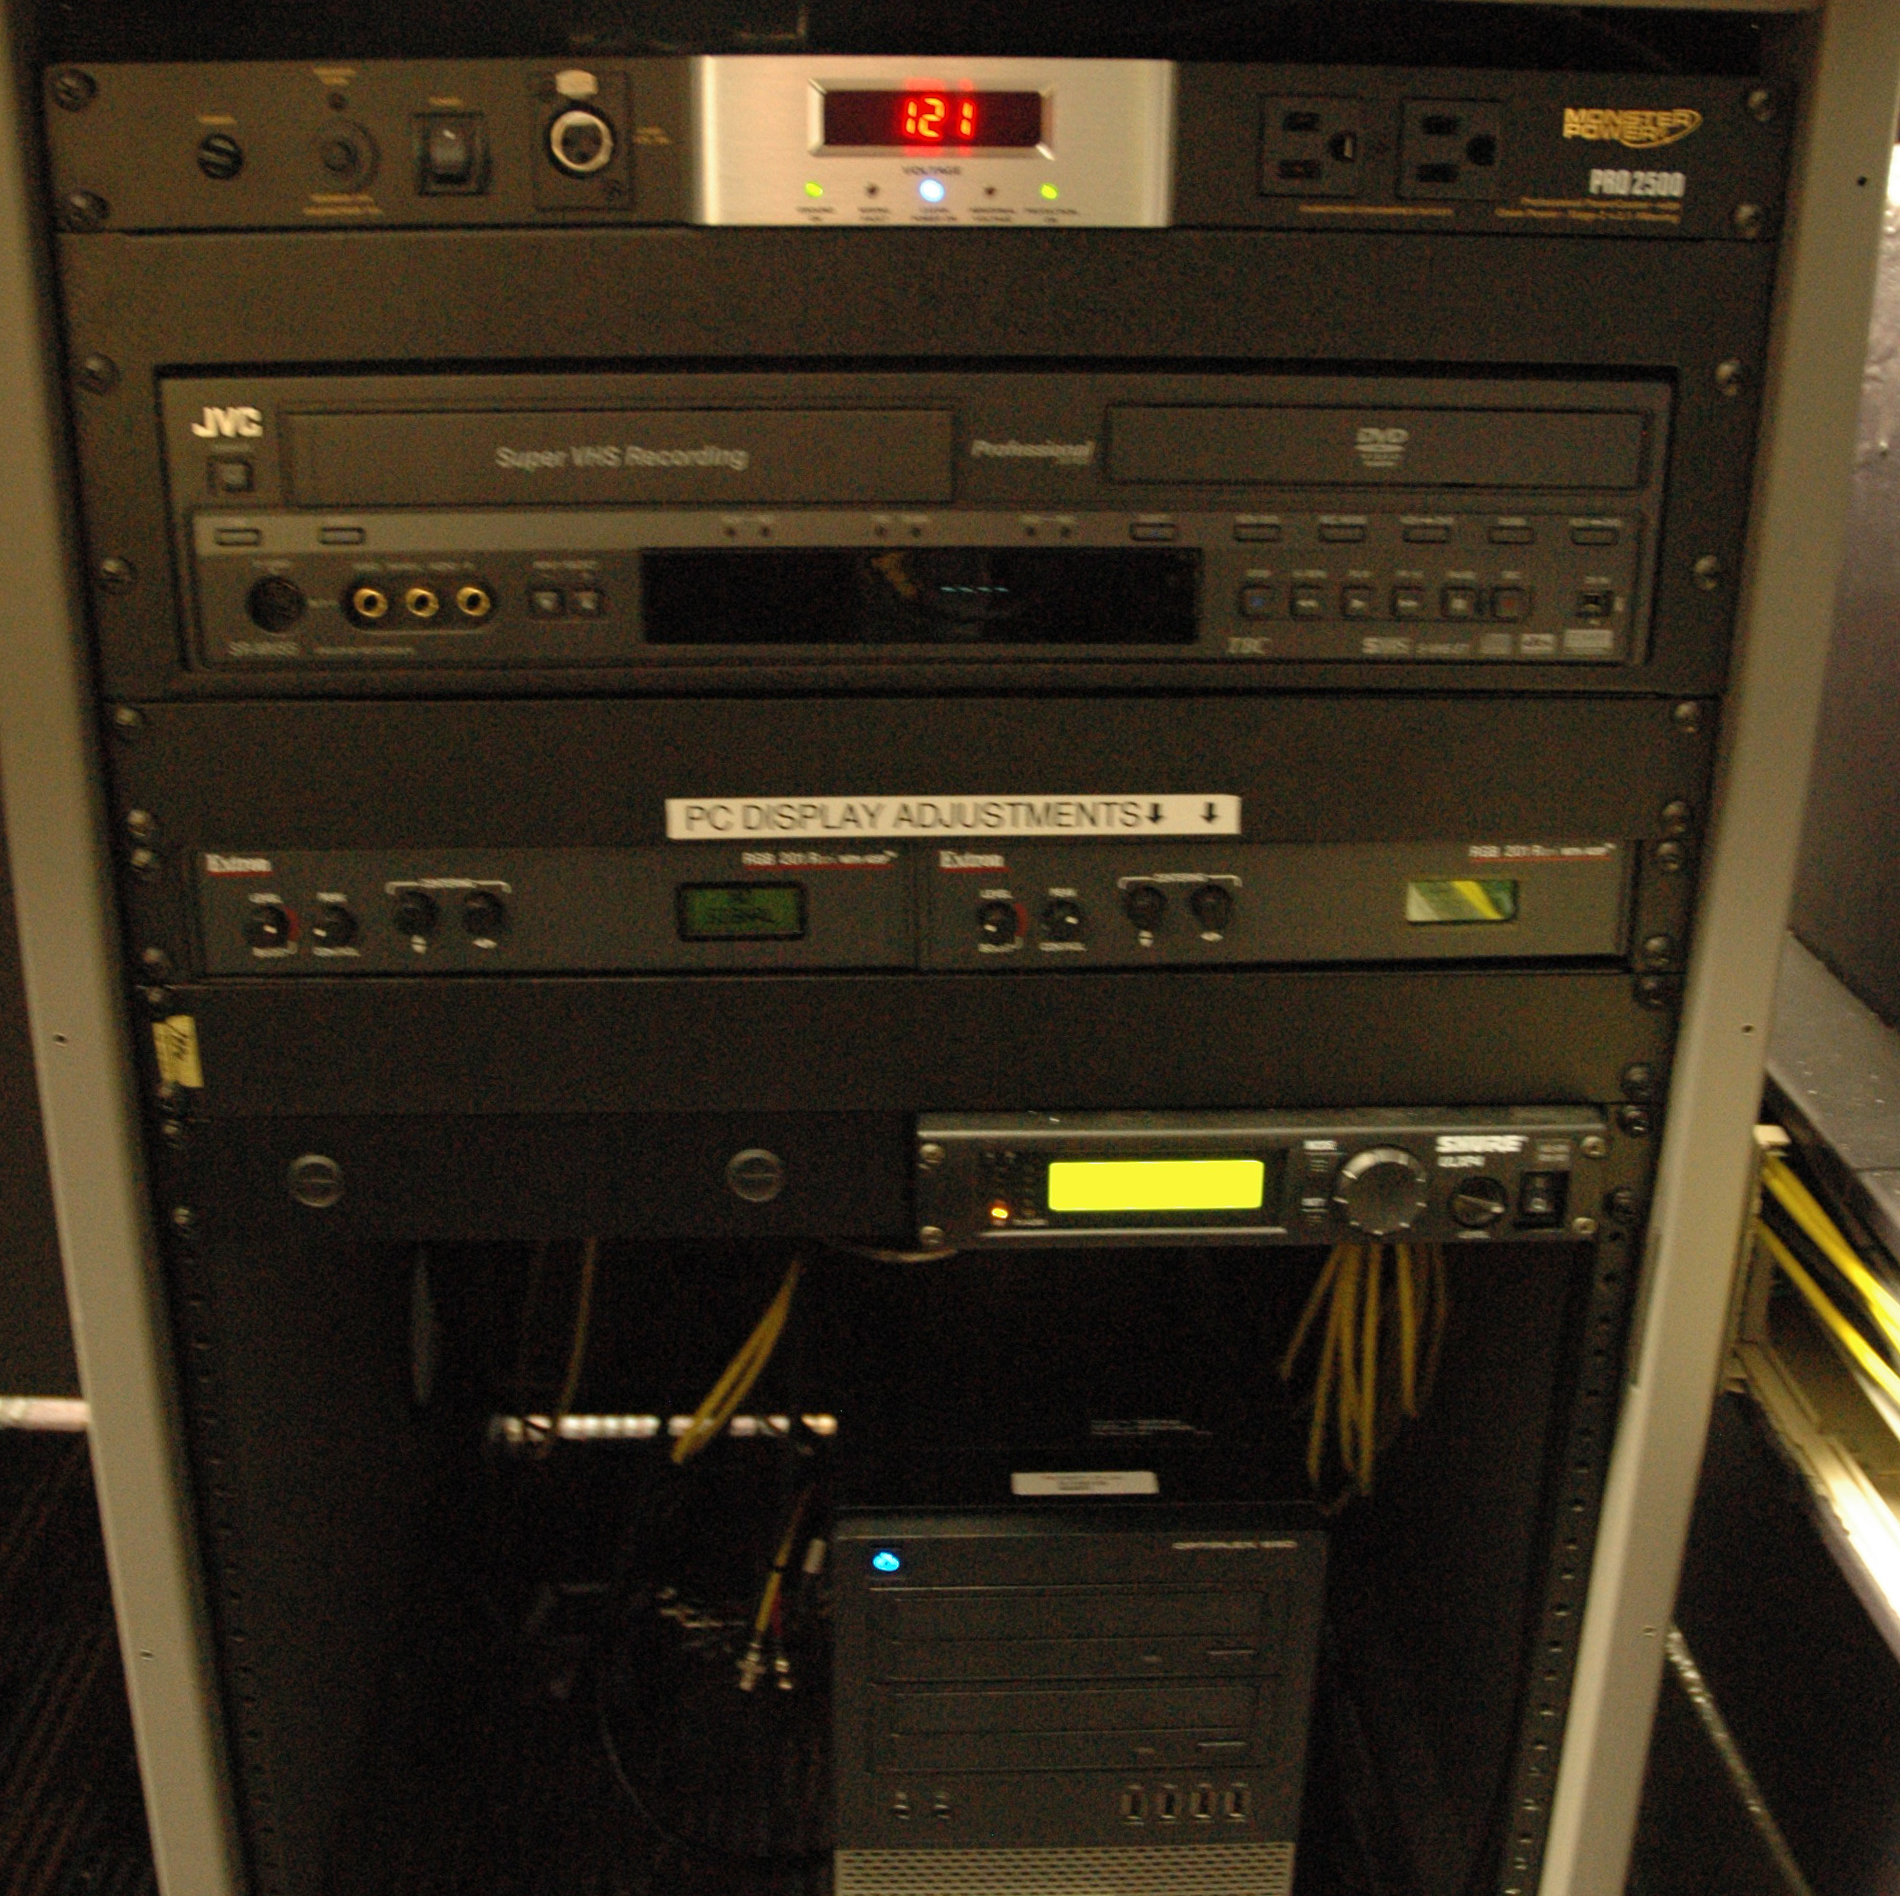 Instructor's control panel for Video conferencing room showing various equipment and components